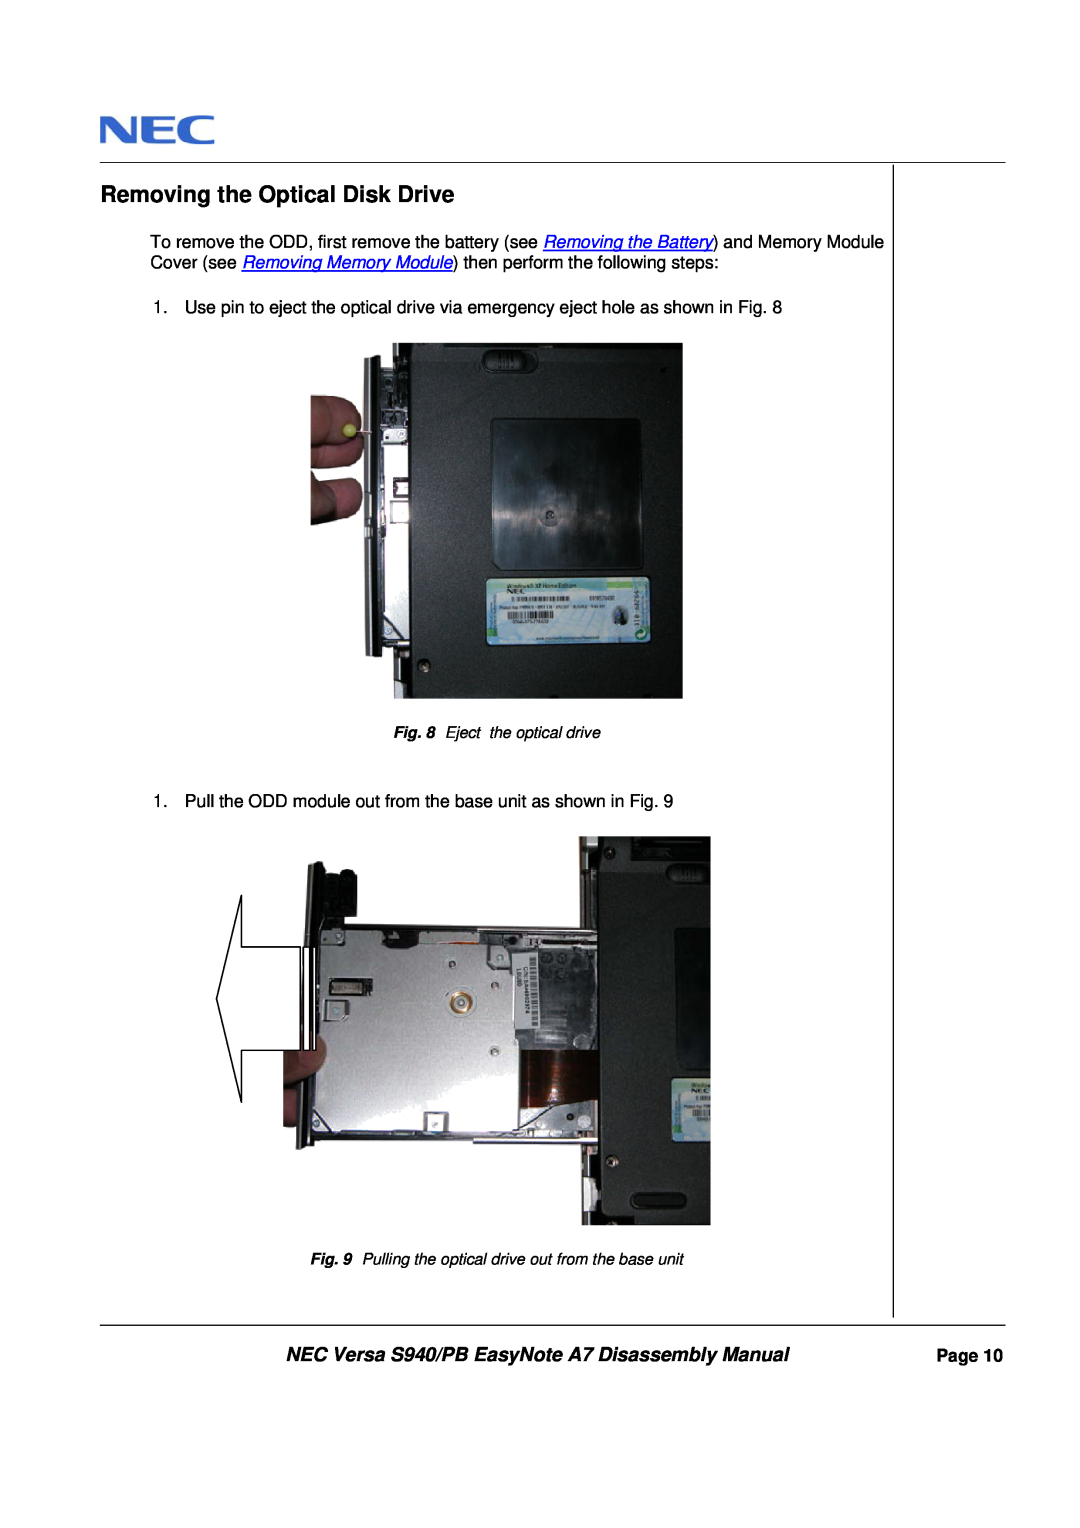 Packard Bell manual Removing the Optical Disk Drive, NEC Versa S940/PB EasyNote A7 Disassembly Manual 